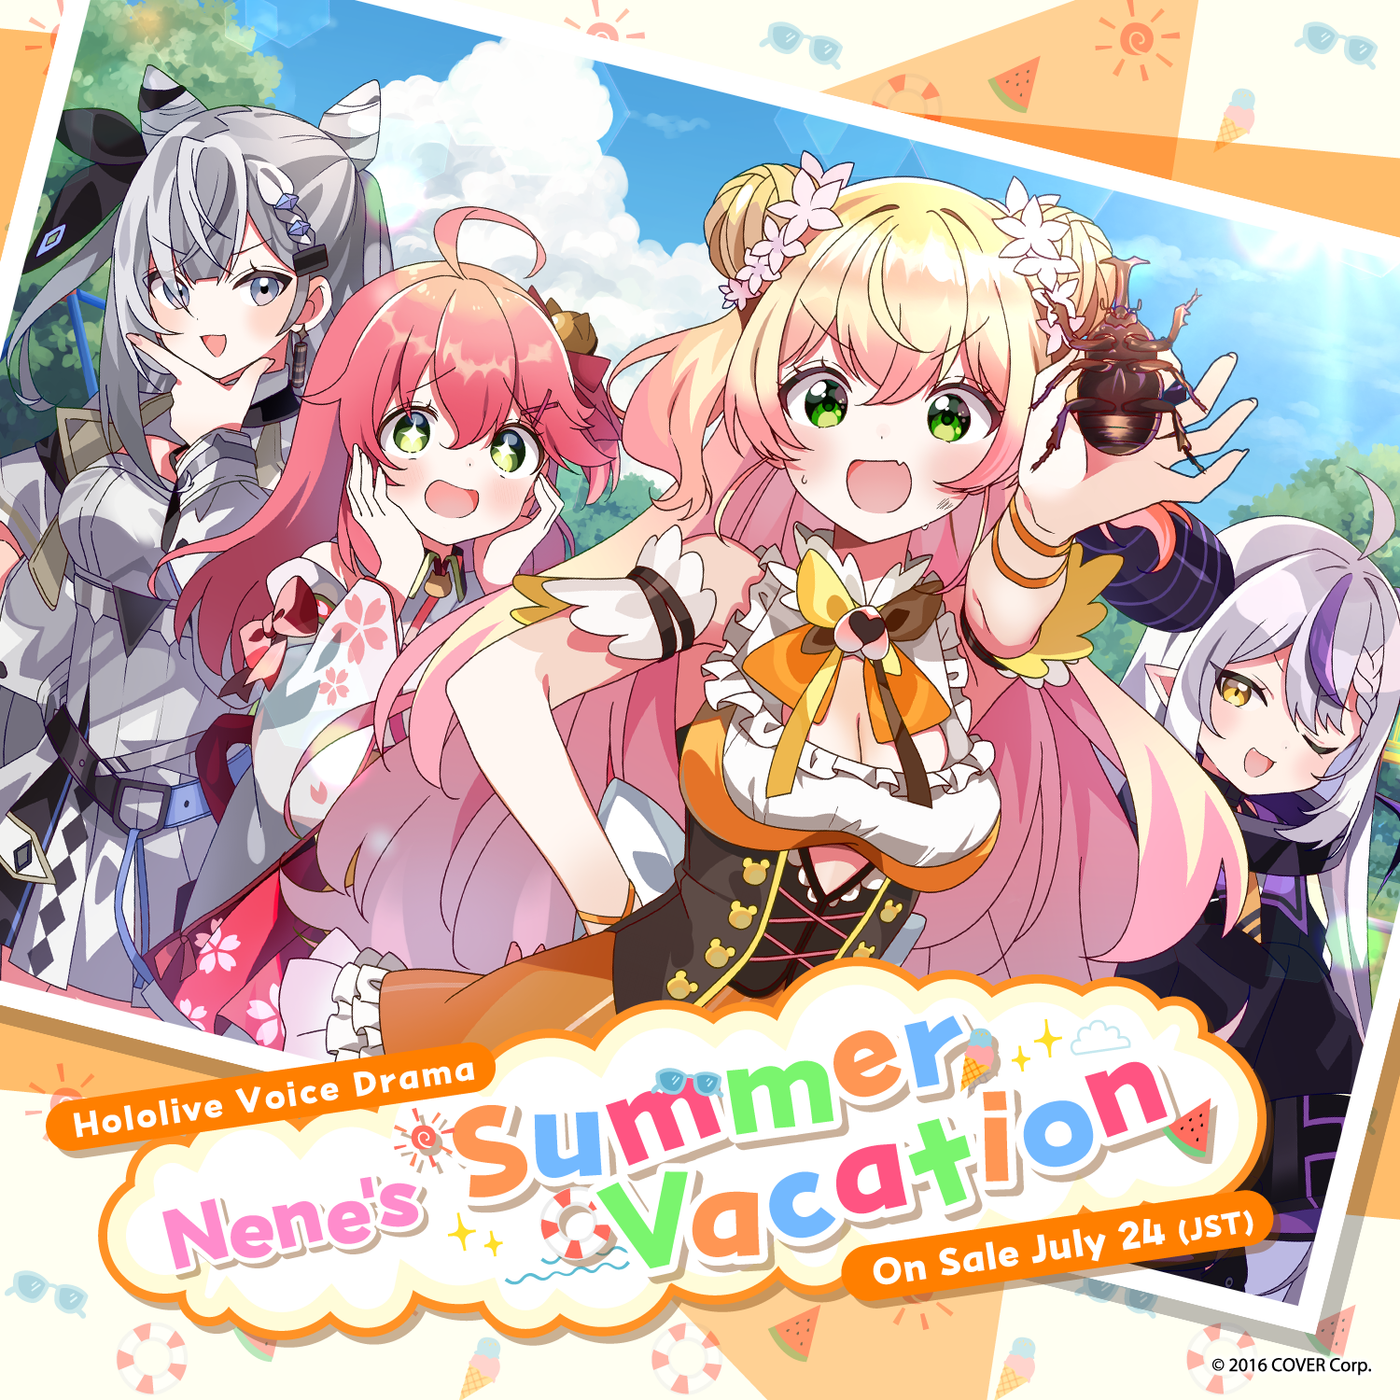 [Pre-order] Hololive Voice Drama "Nene's Summer Vacation"